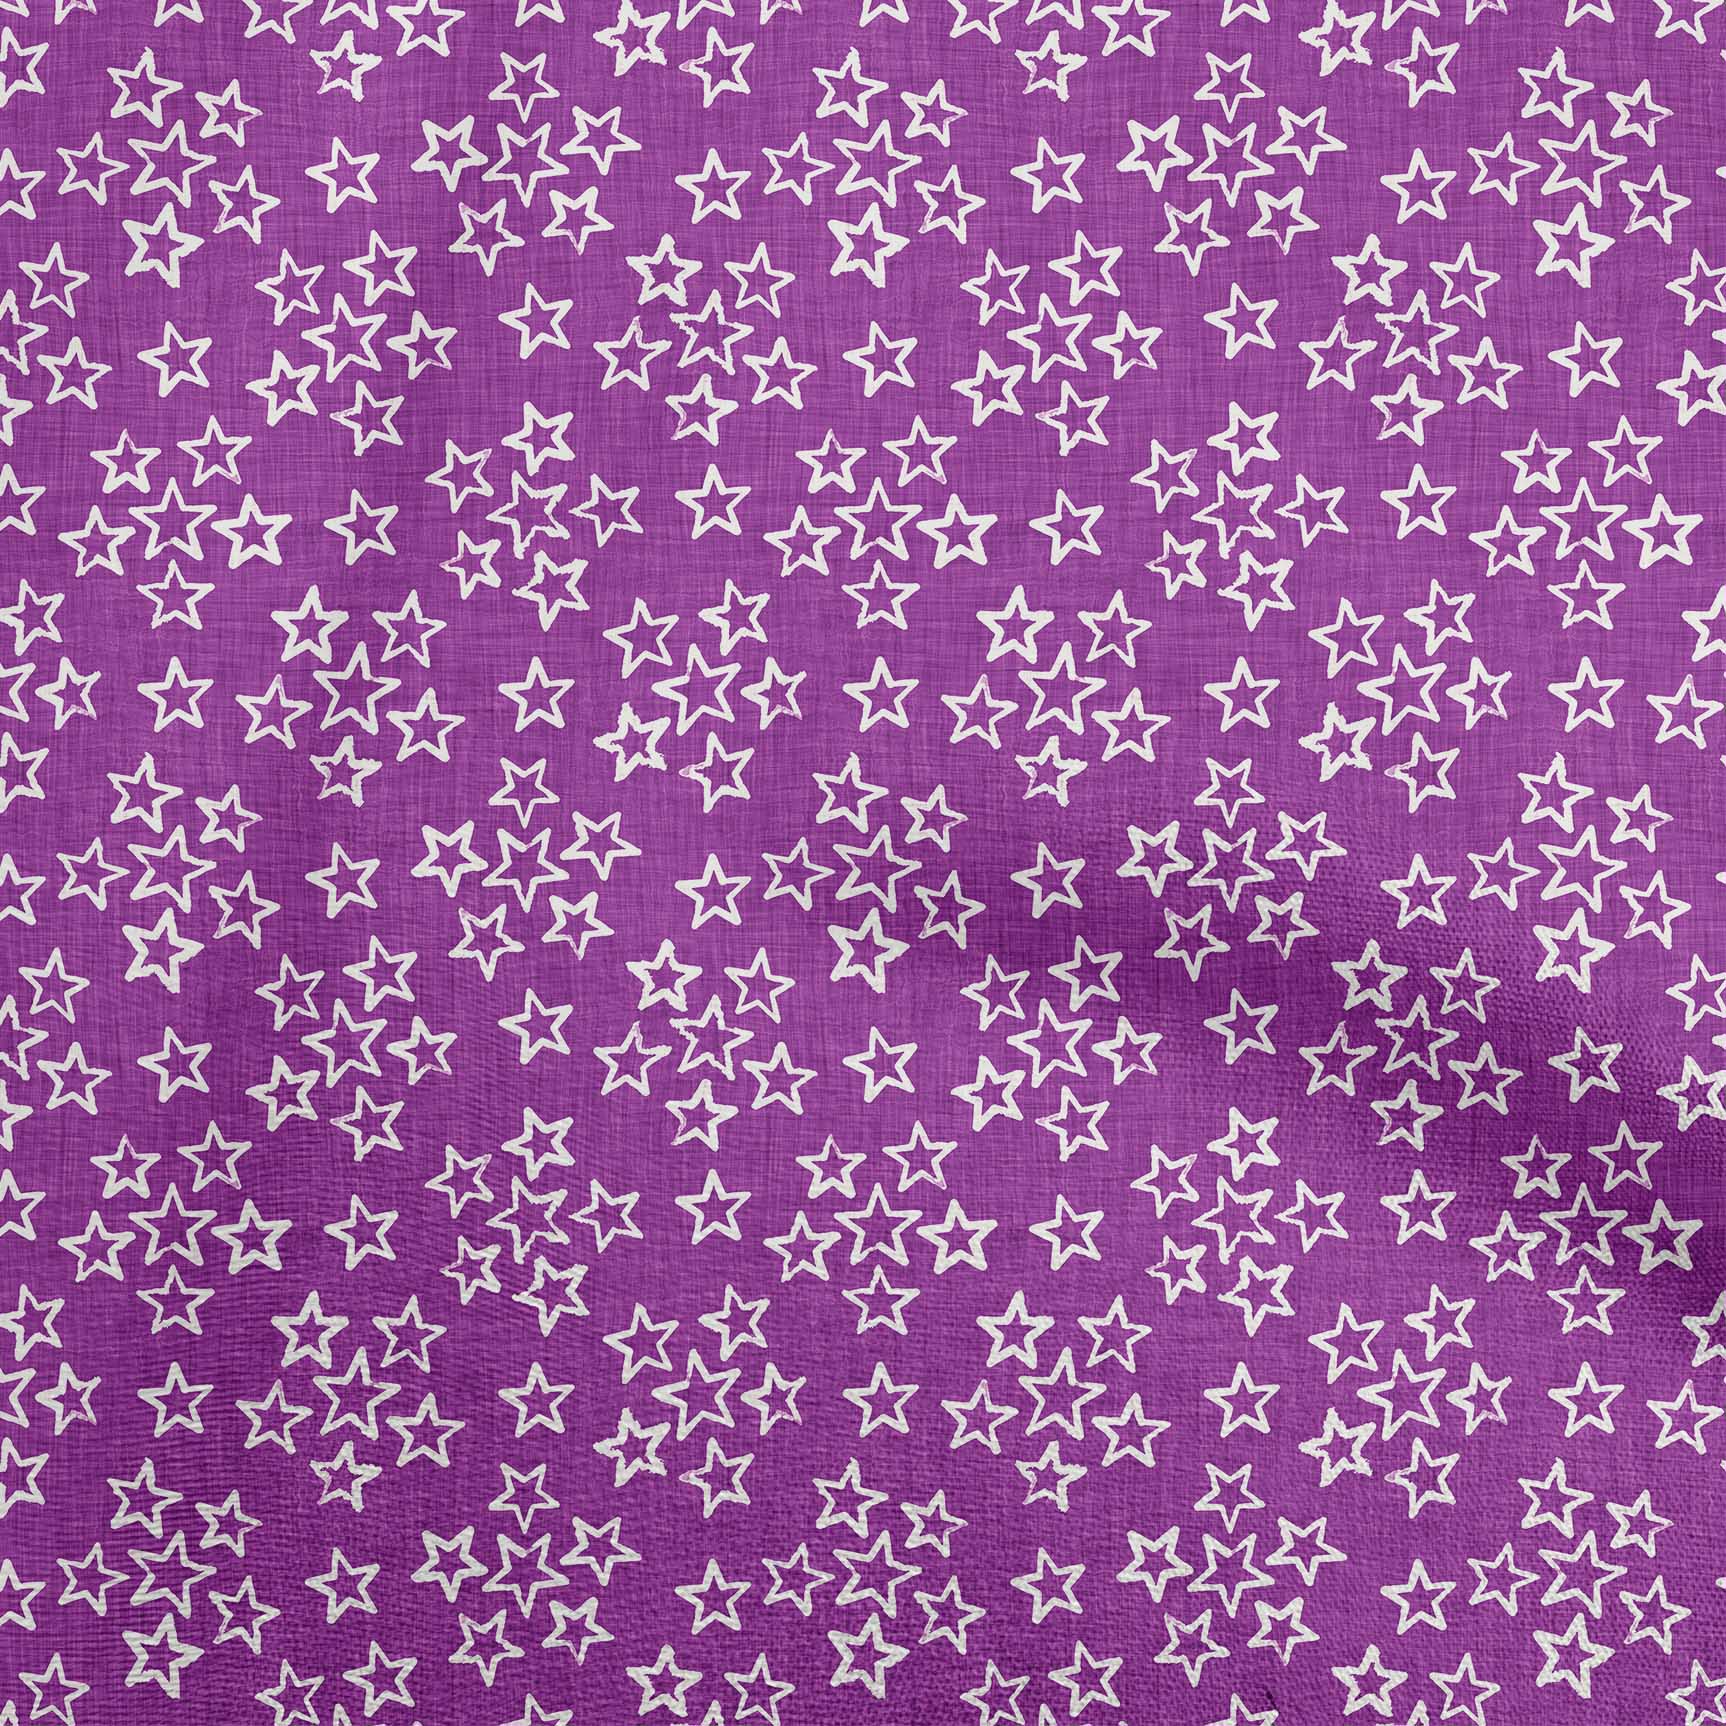 oneOone Cotton Silk Purple Fabric Asian Block Dress Material Fabric Print  Fabric By The Yard 42 Inch Wide 